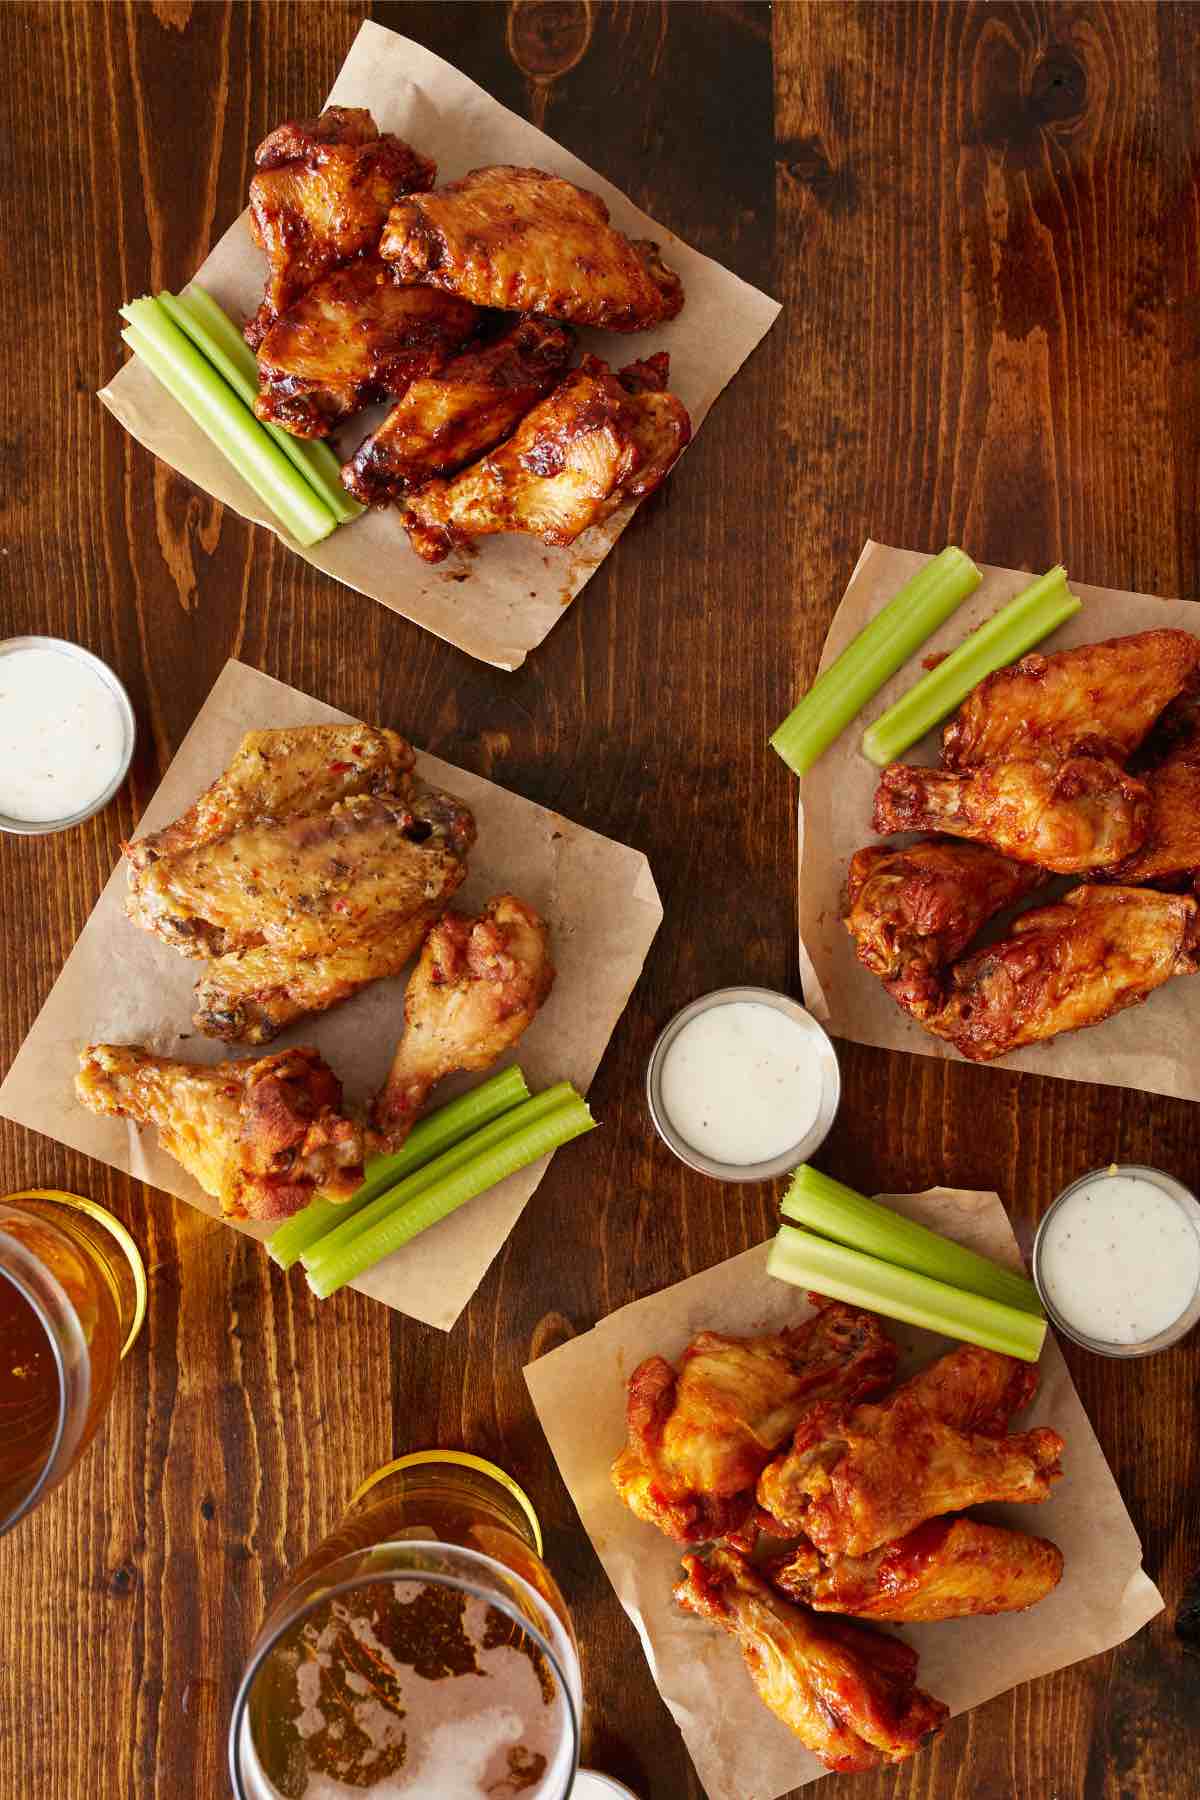 When you demand real chicken wings, and real flavor – Wingstop can’t be beat! From old school mild, to Spicy Korean Q, to Atomic we’ll preview the Best Wingstop Flavors below. You’ll definitely find your favorite sauces or dry rubs!